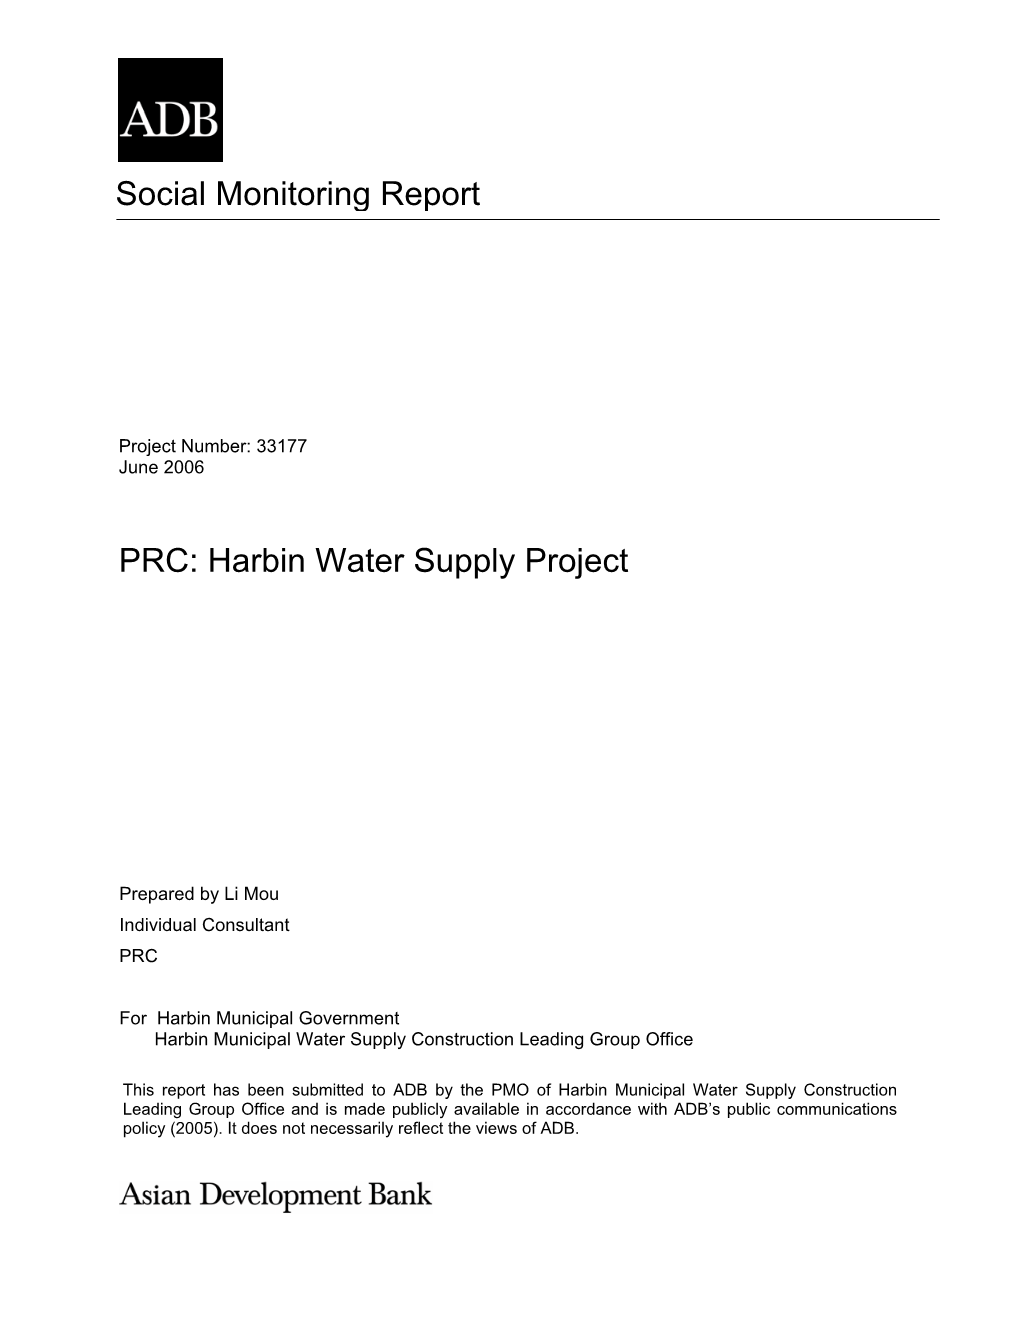 Social Monitoring Report PRC: Harbin Water Supply Project